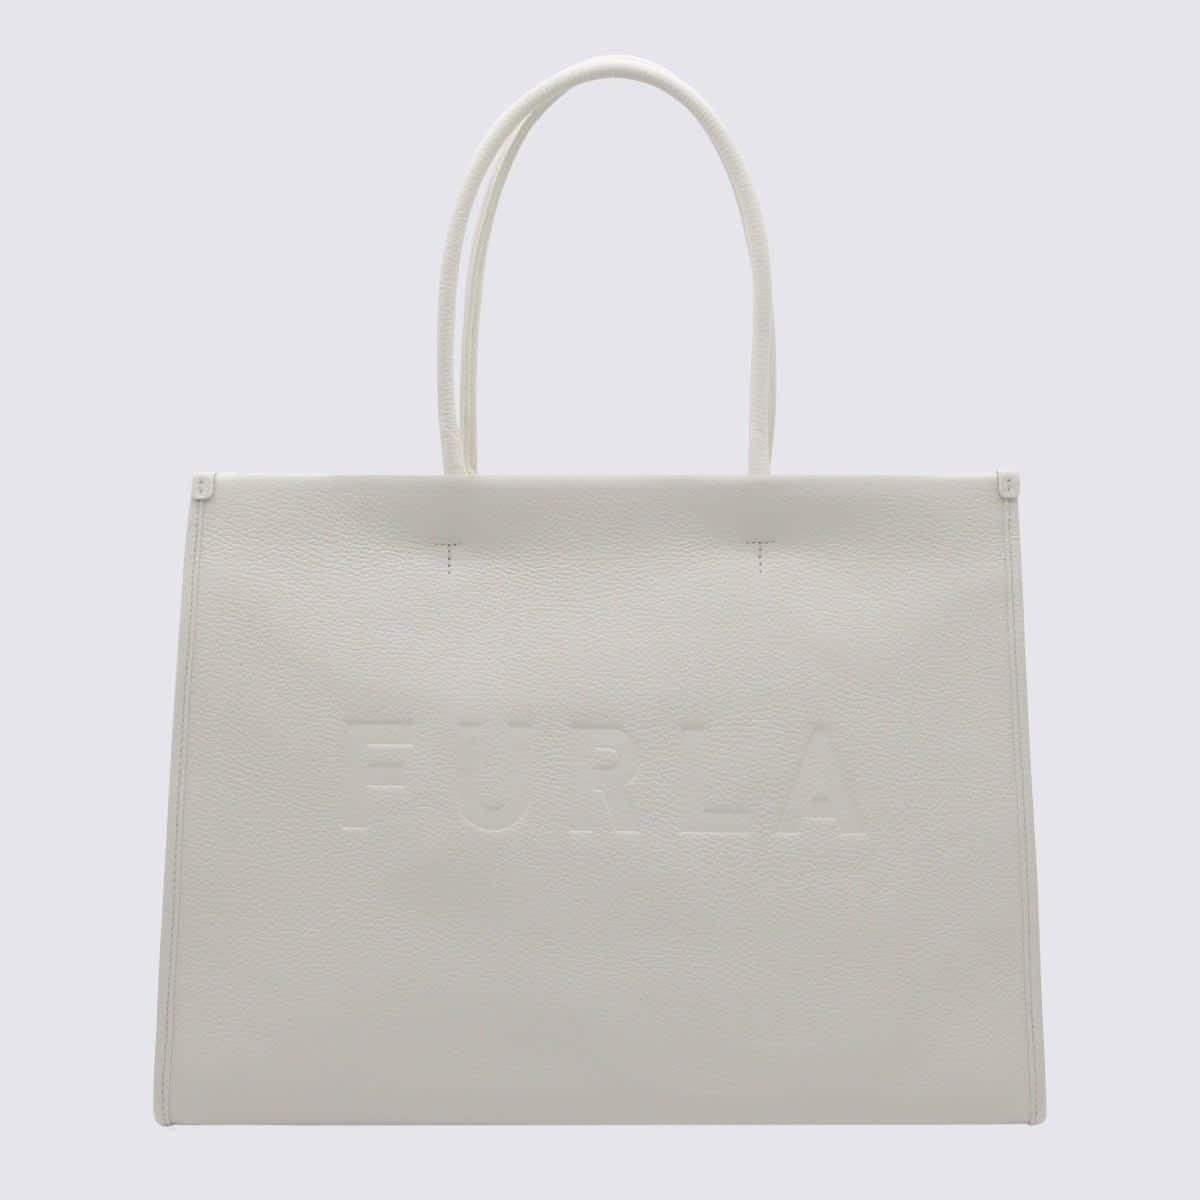 Shop Furla Marshmallow Leather Opportunity Tote Bag